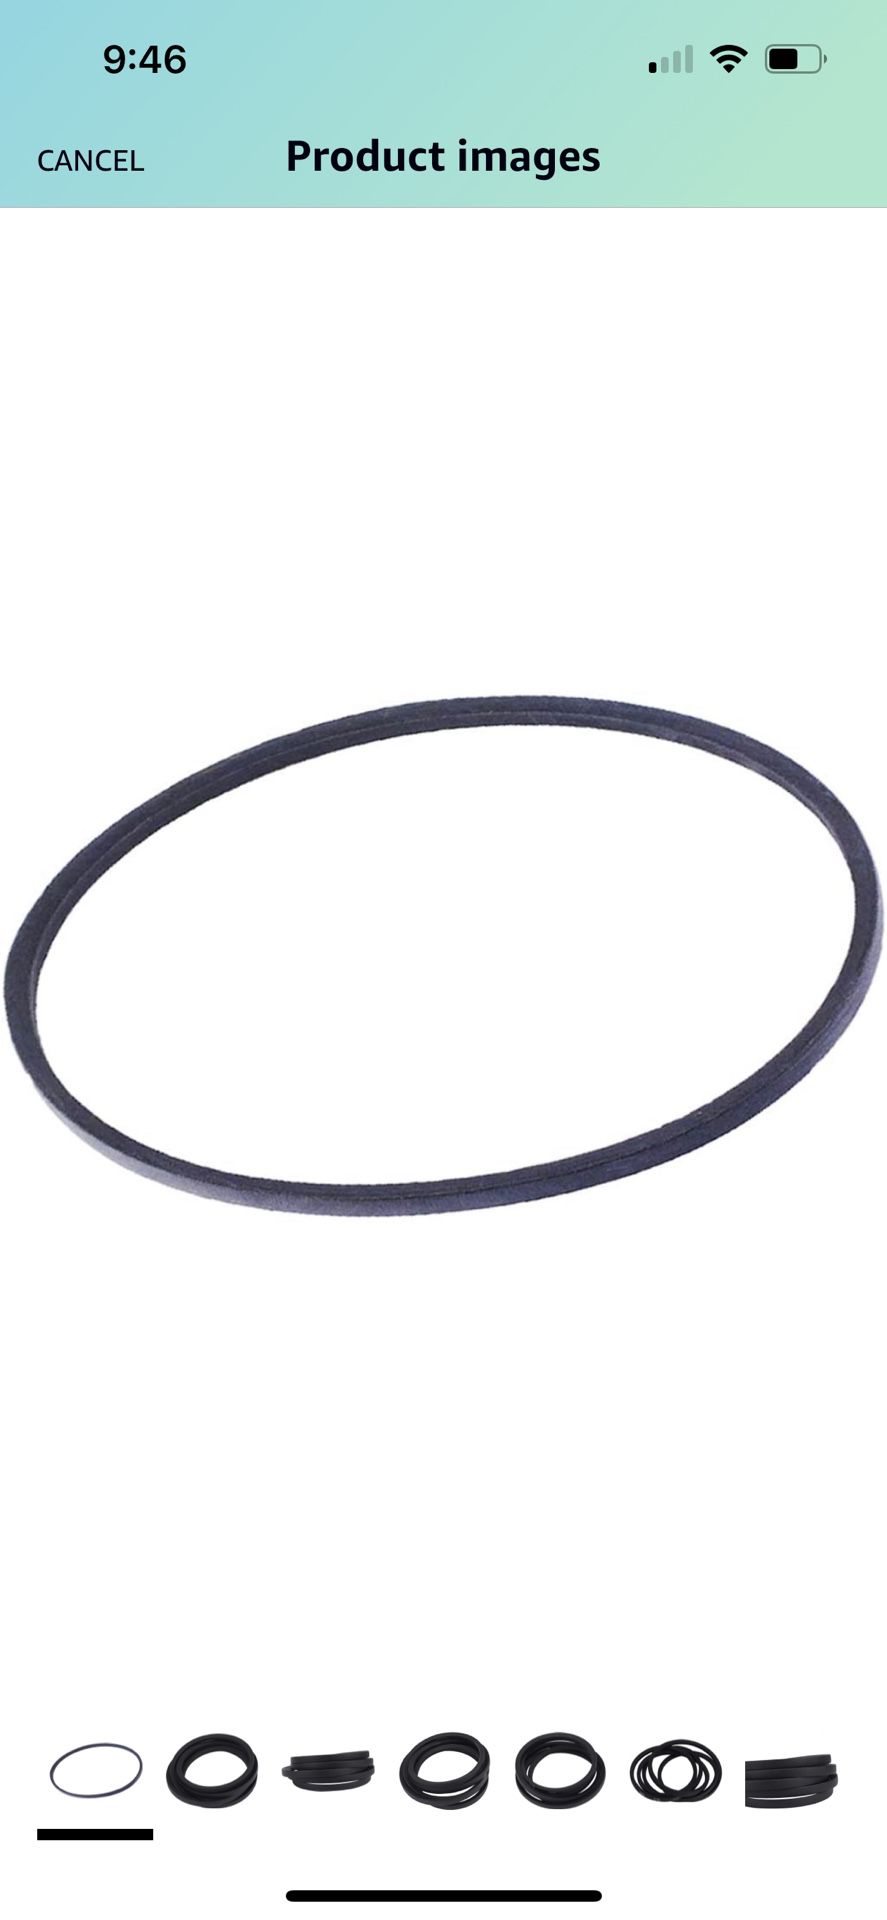 Hipa 110883X Drive Belt Compatible with Husqvarna Sears Craftsman (contact info removed)83 Lawn Mower Tractor 4L980 1/2 x 98